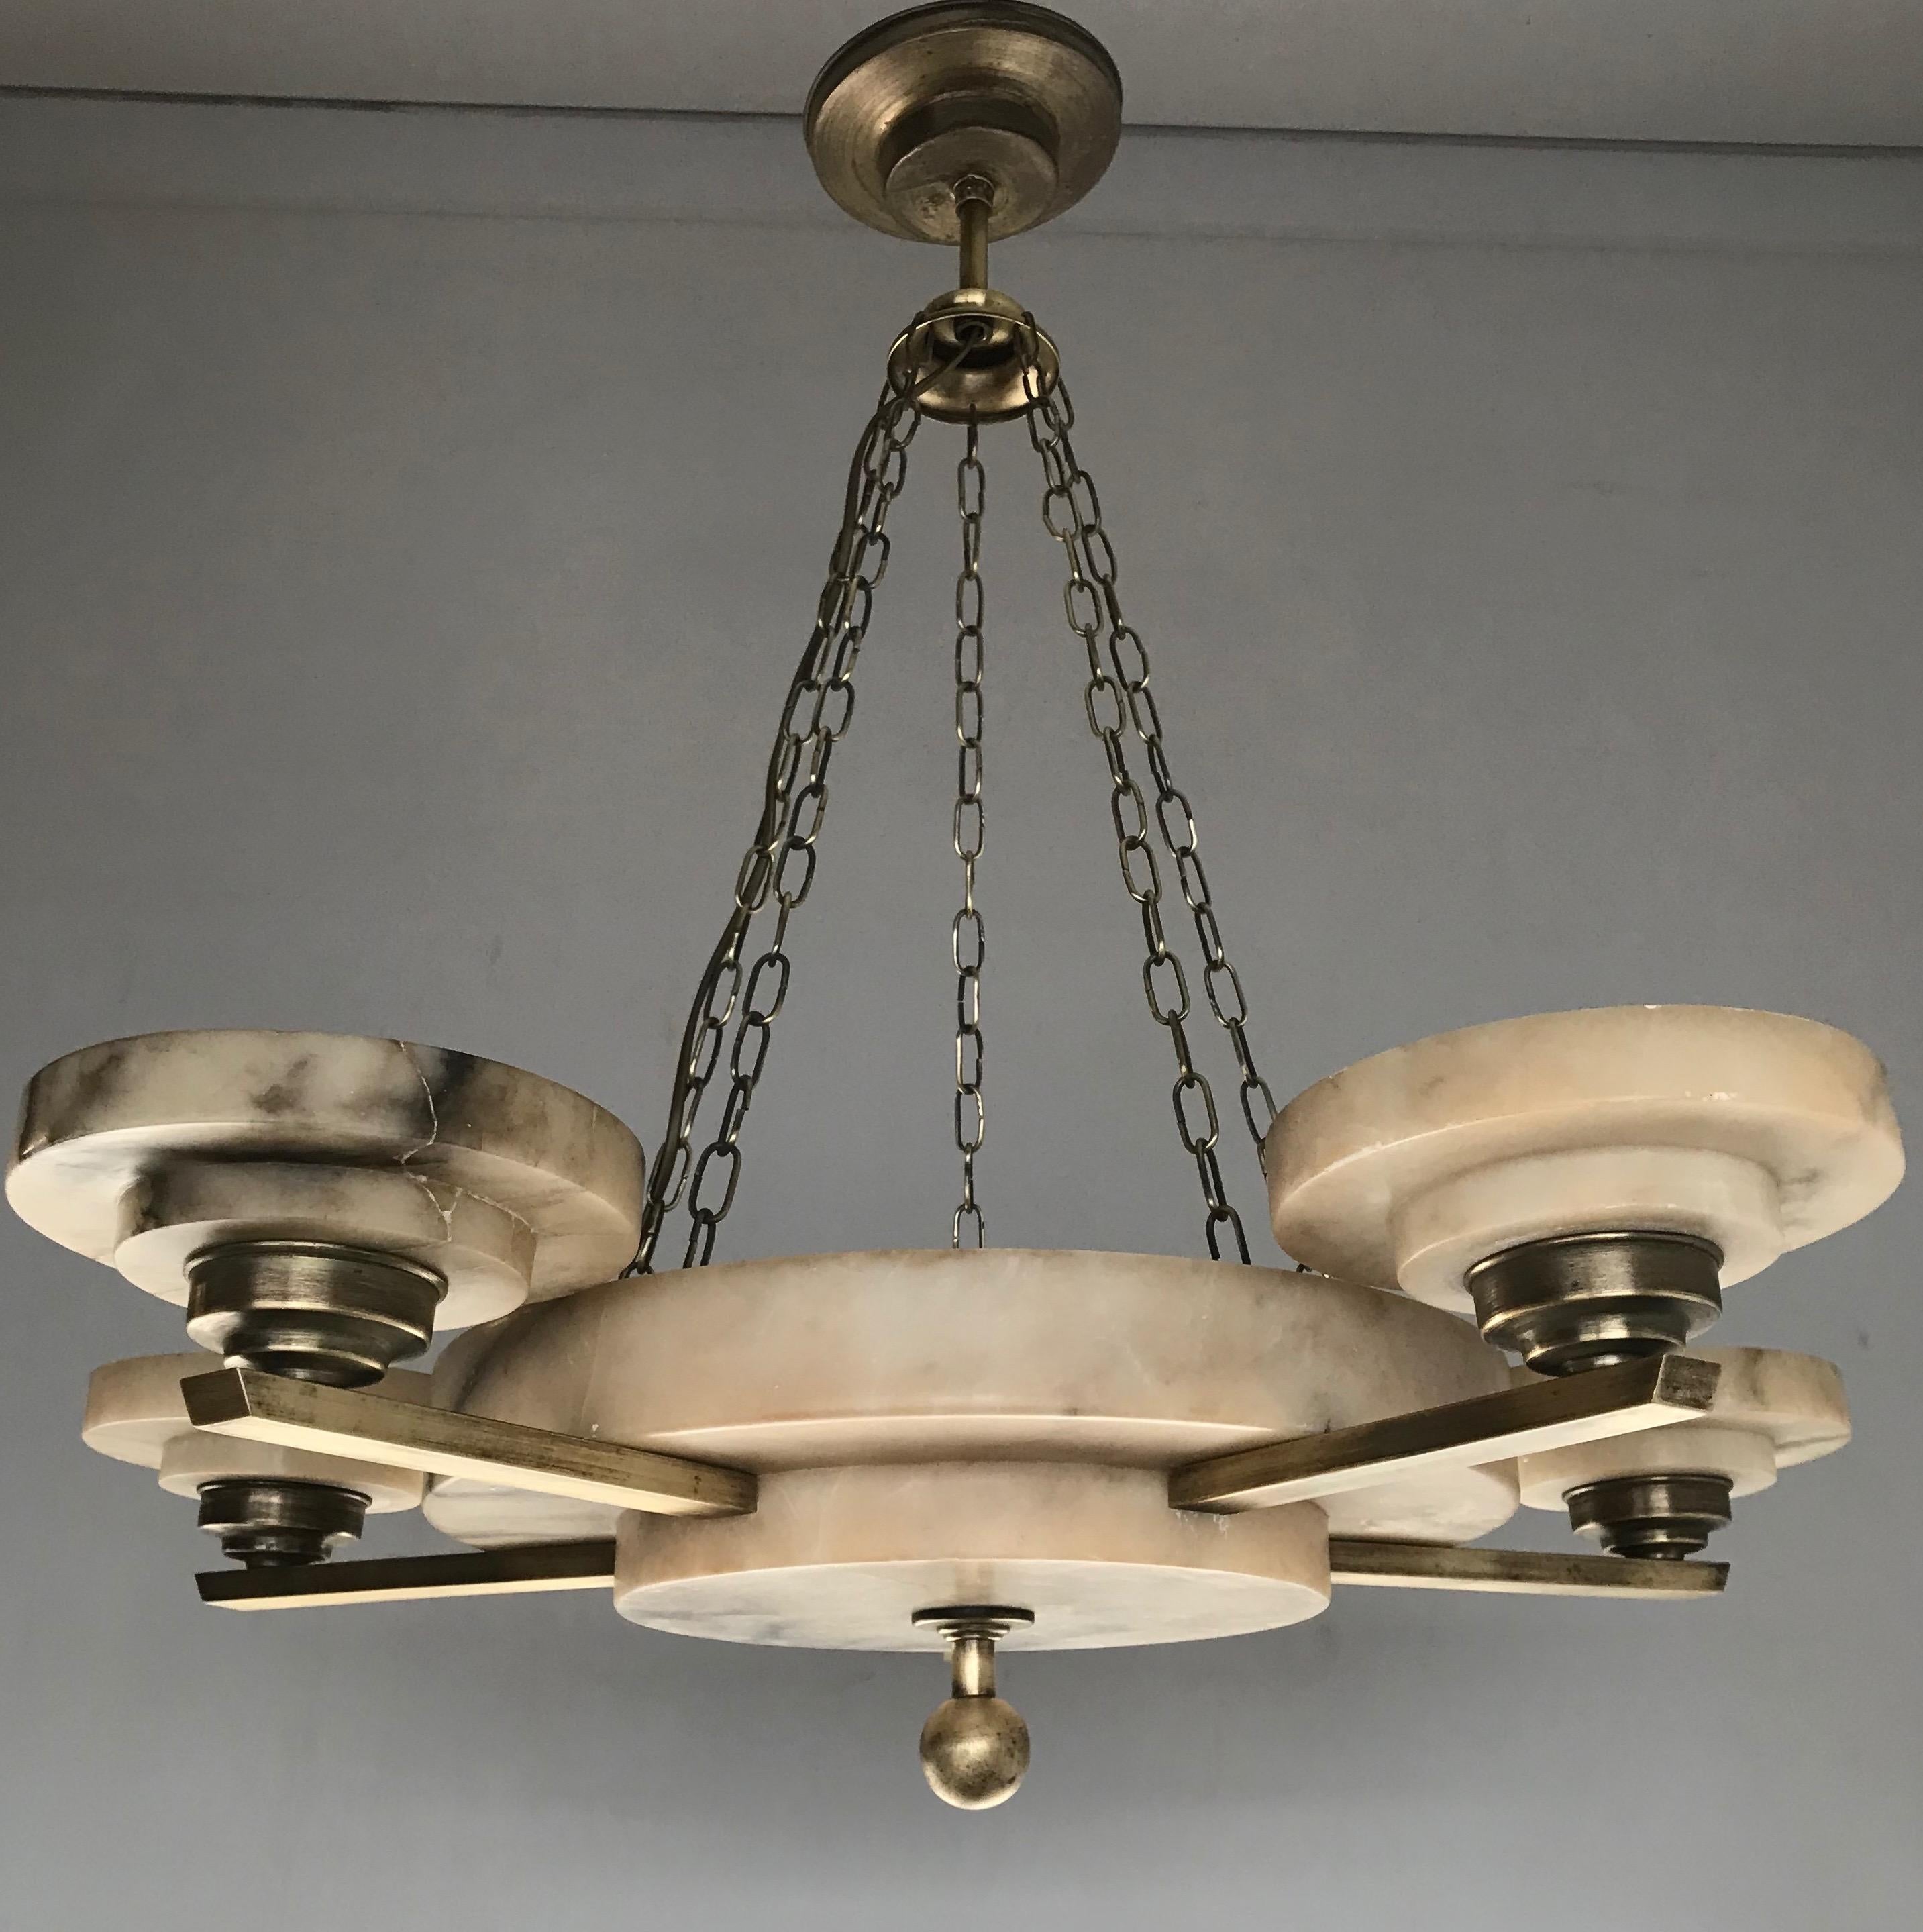 Hand-Crafted Stunning and Timeless Alabaster and Brass Five-Arm Art Deco Pendant / Chandelier